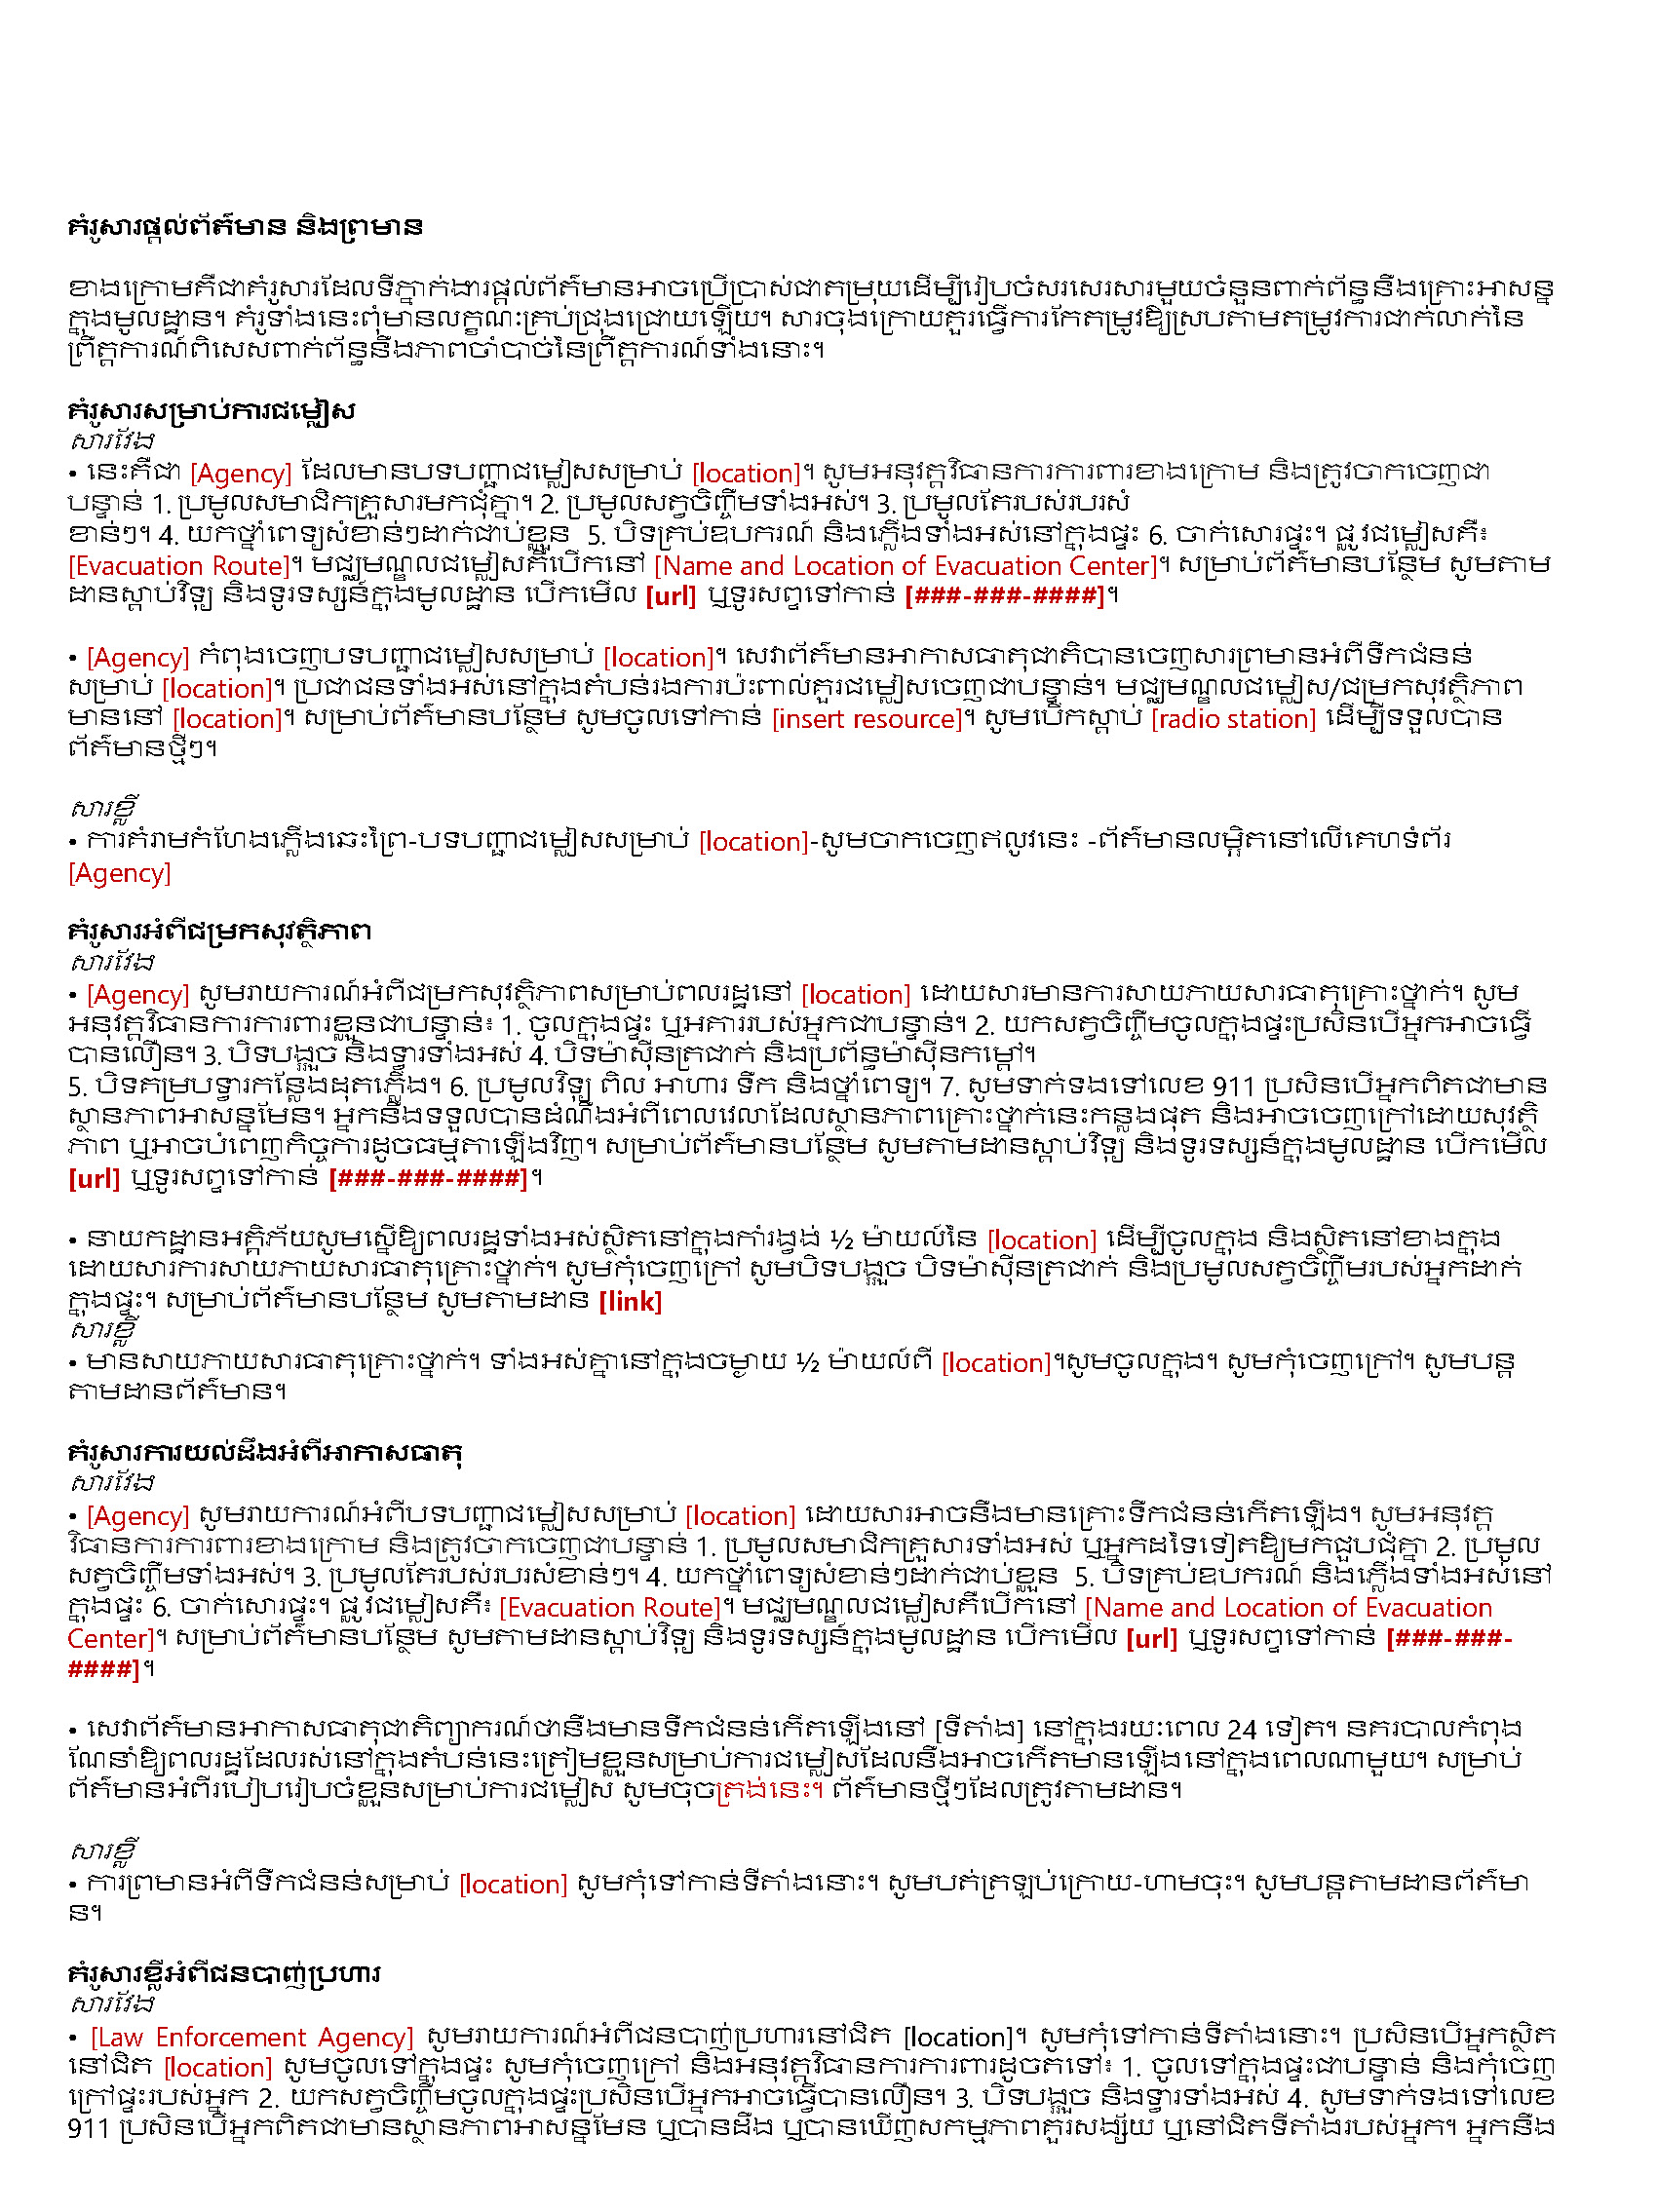 Image of the Sample AW Messages Khmer document